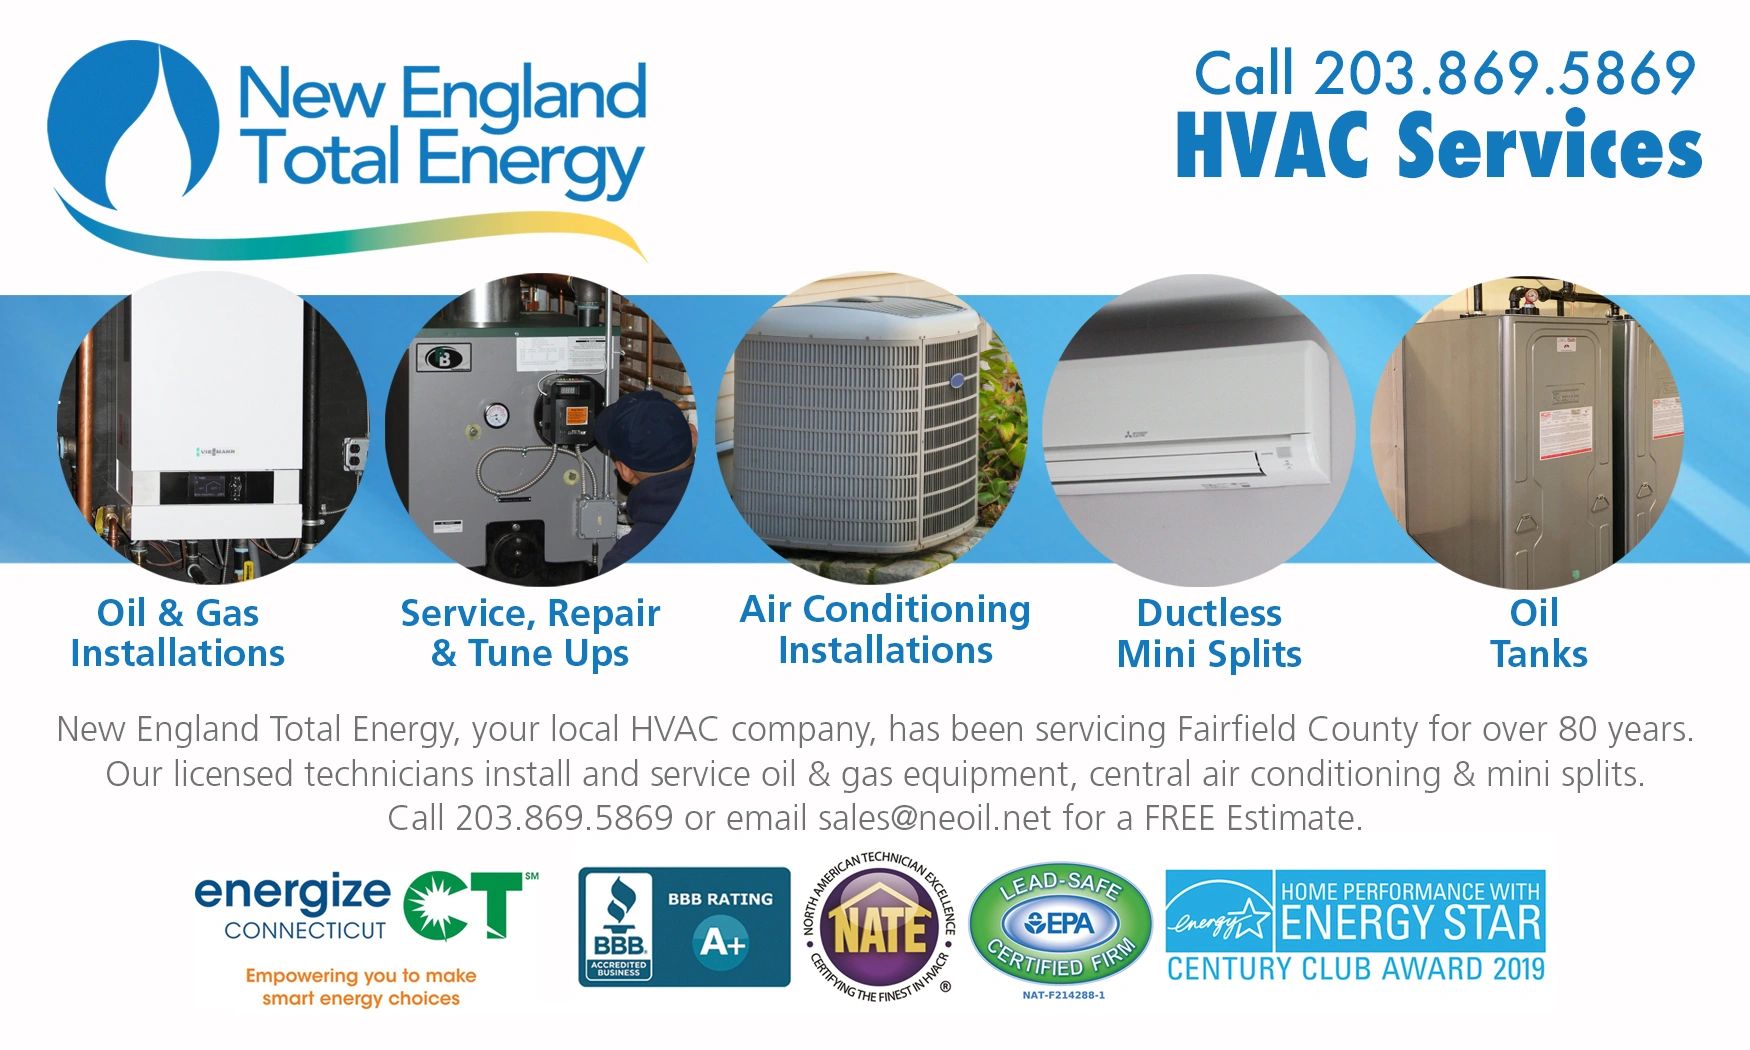 HVAC Installations, Service and Repairs in Fairfield and Westchester County.